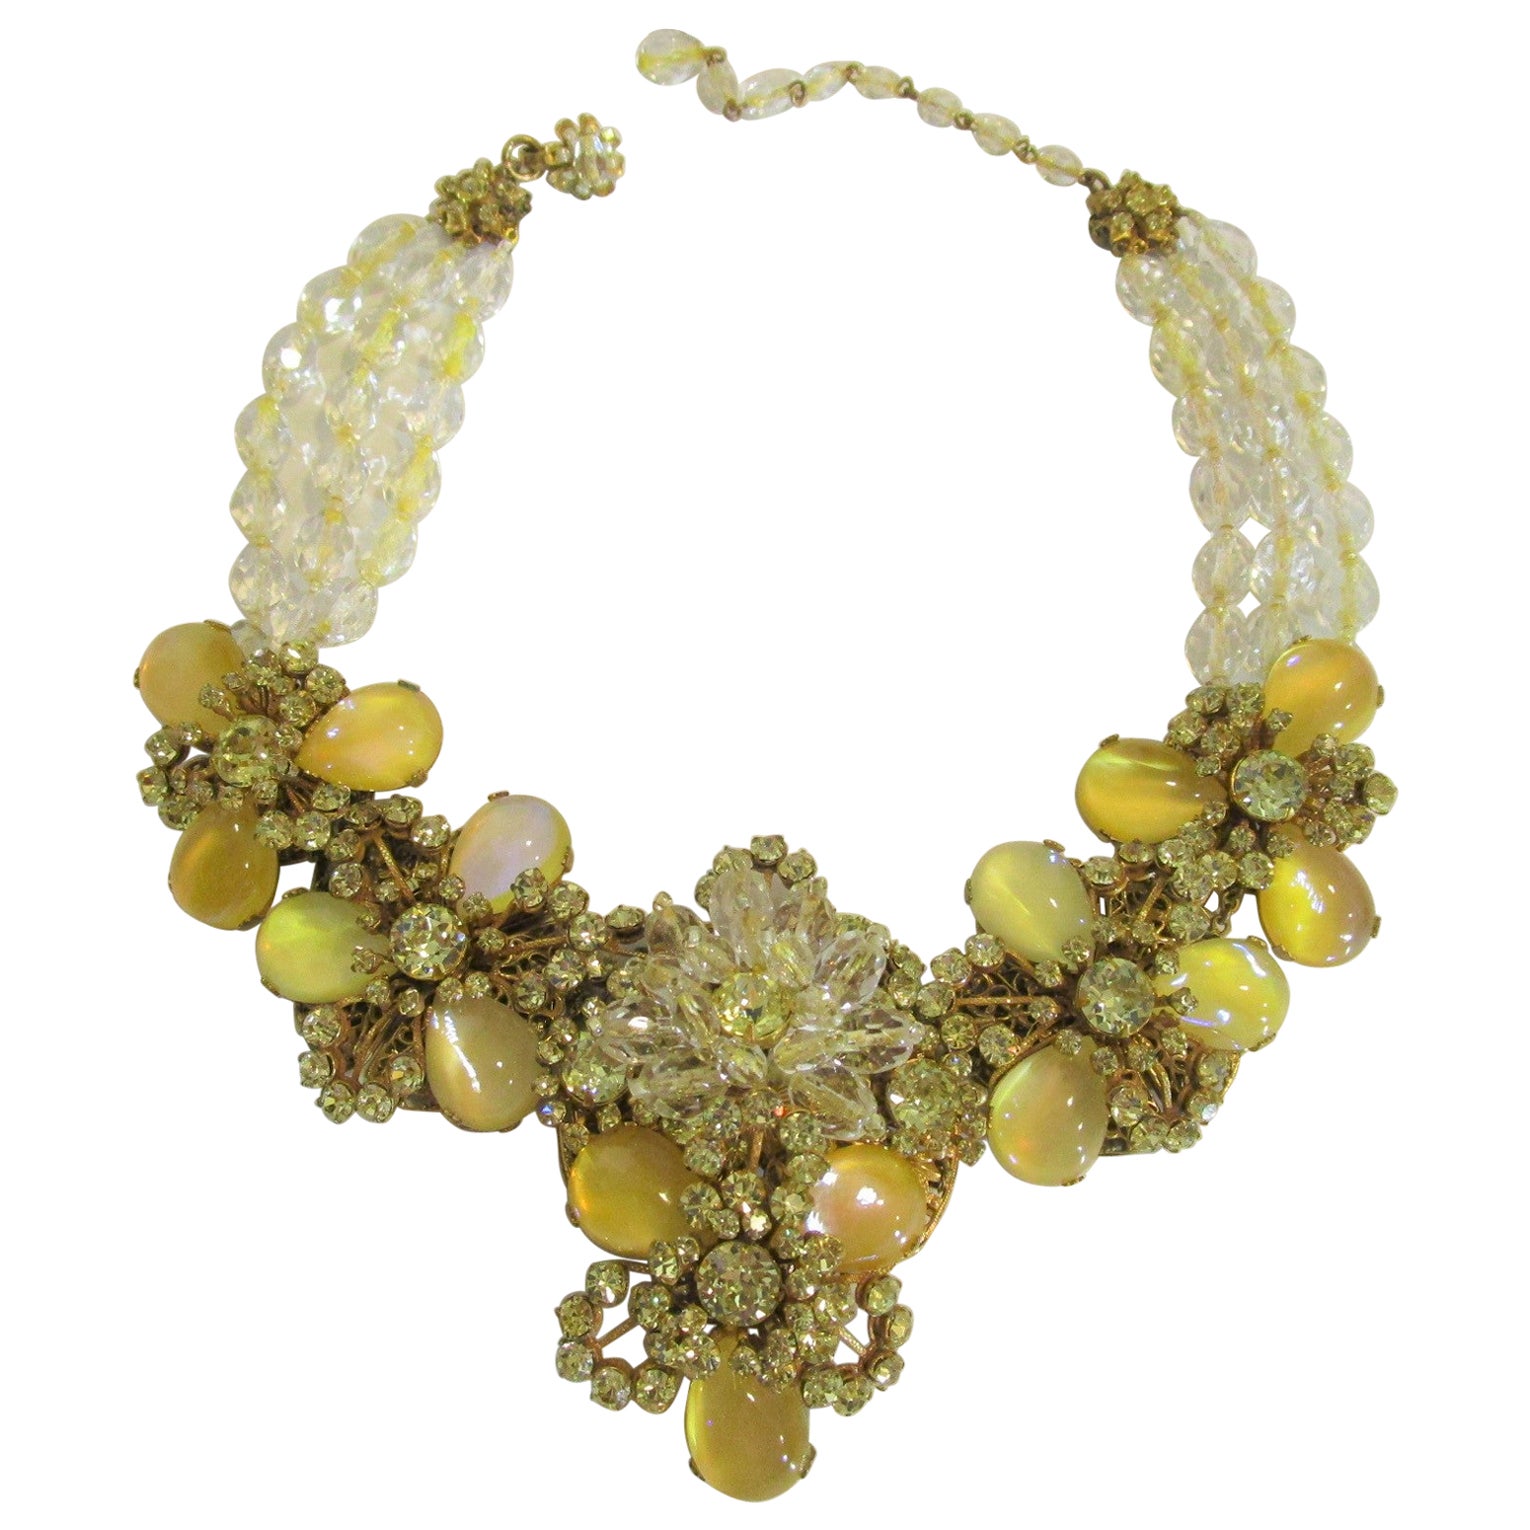 MIRIAM HASKELL Necklace Glass Beads Rhinestones Russian Gold Yellow SIGNED